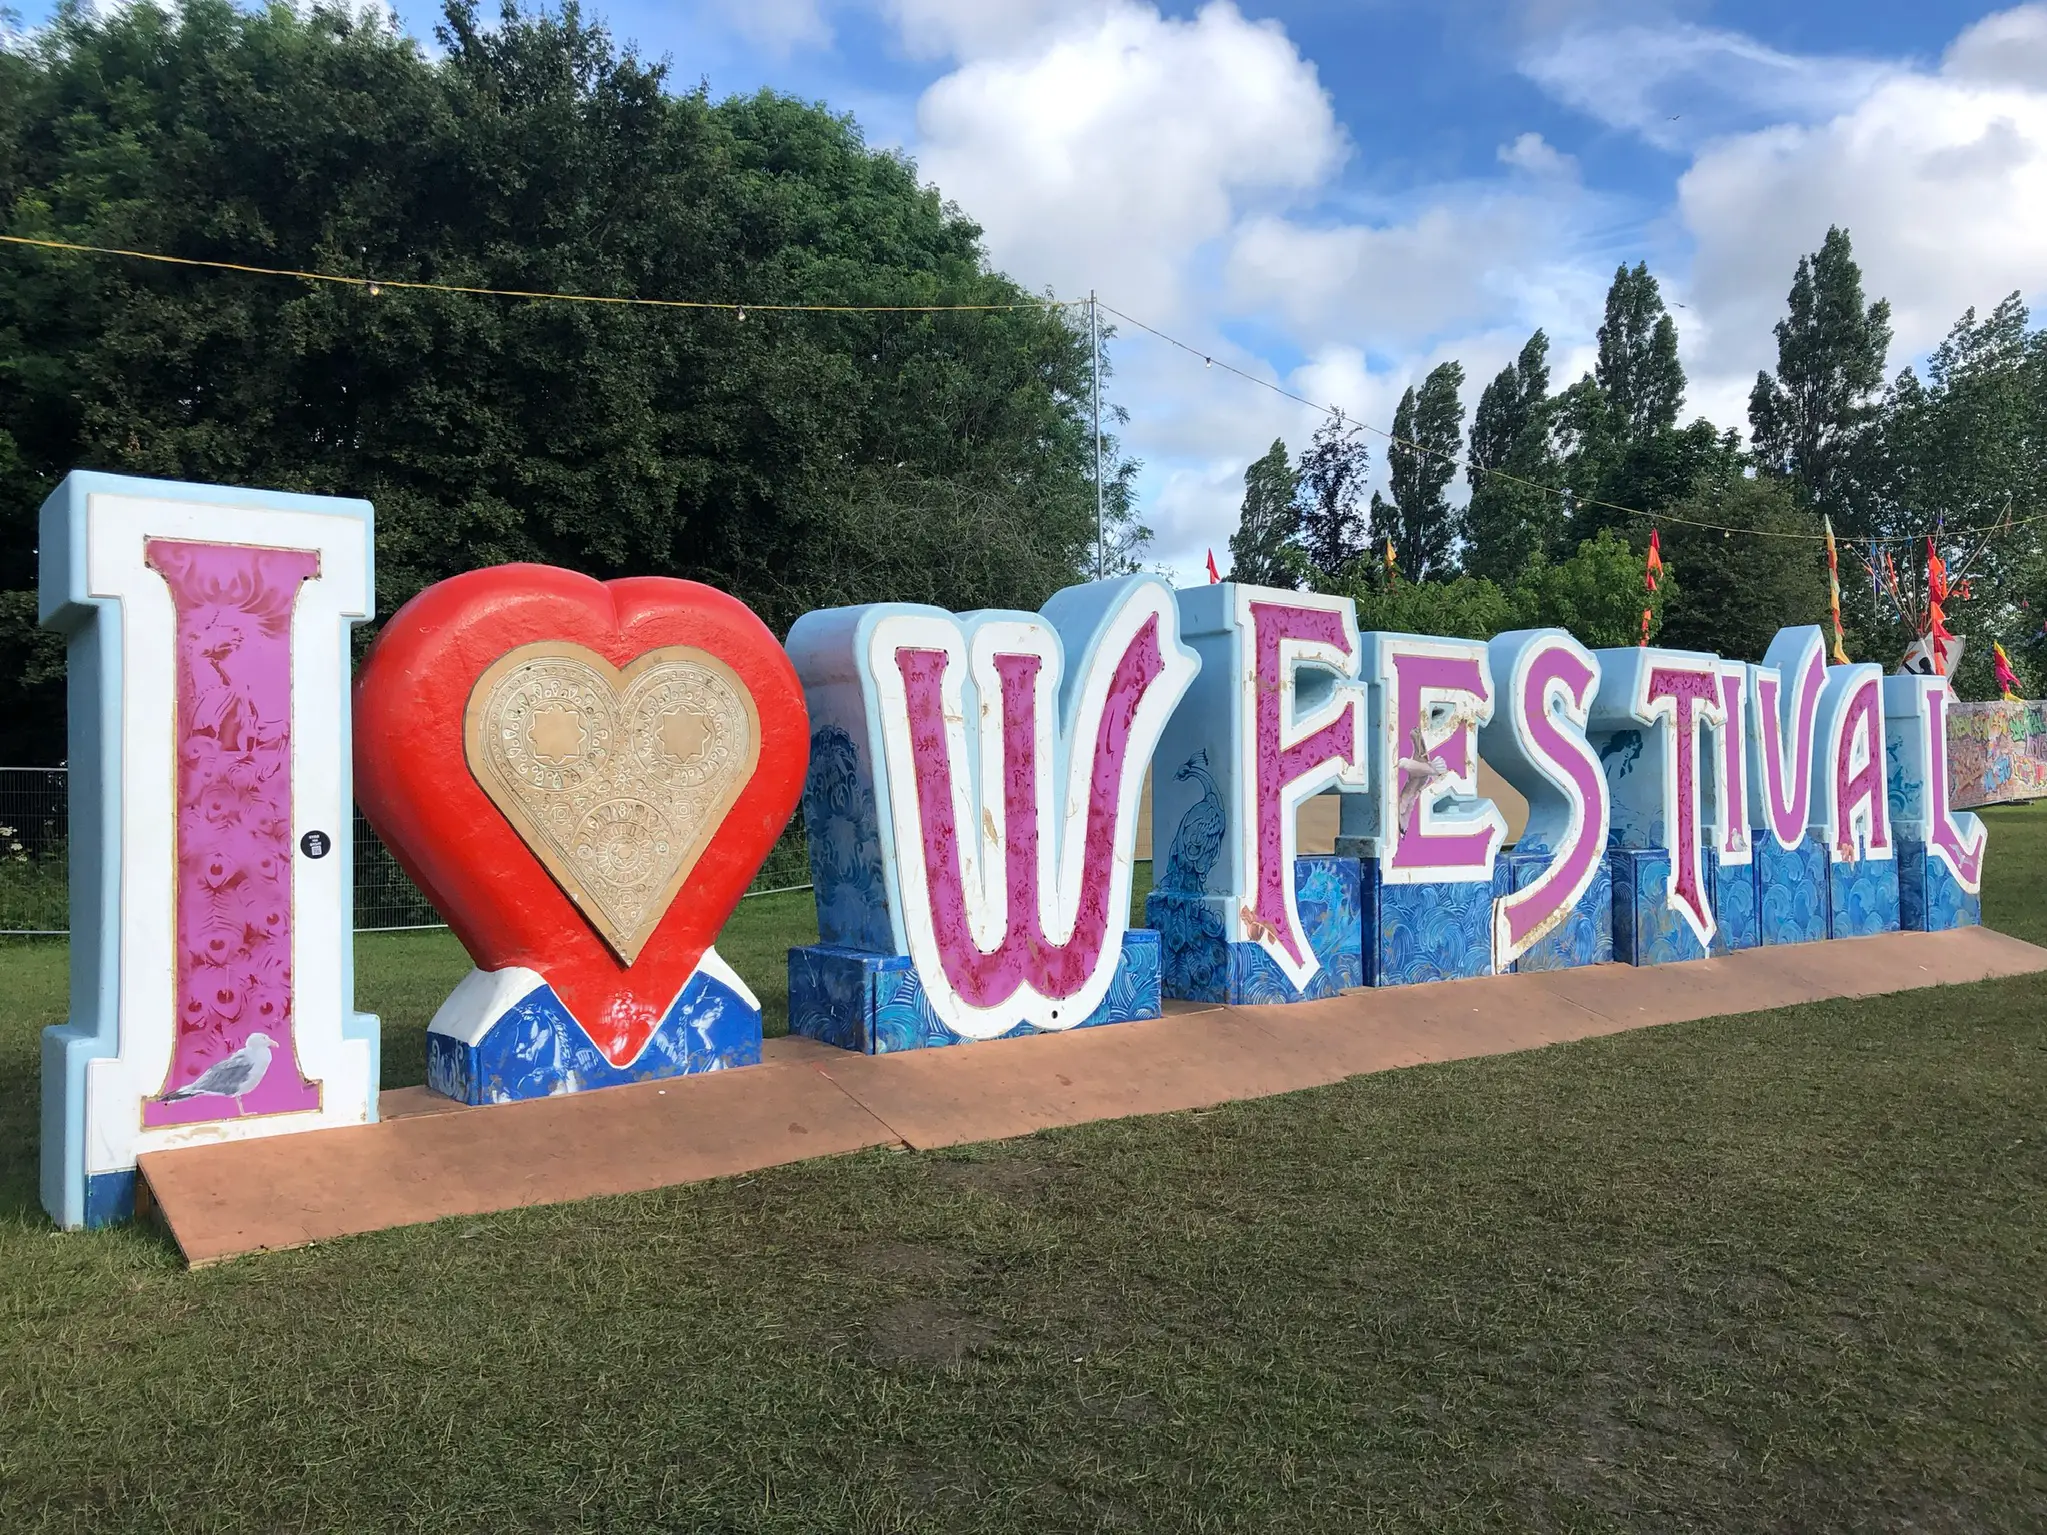 Giant letters at Isle of Wight festival